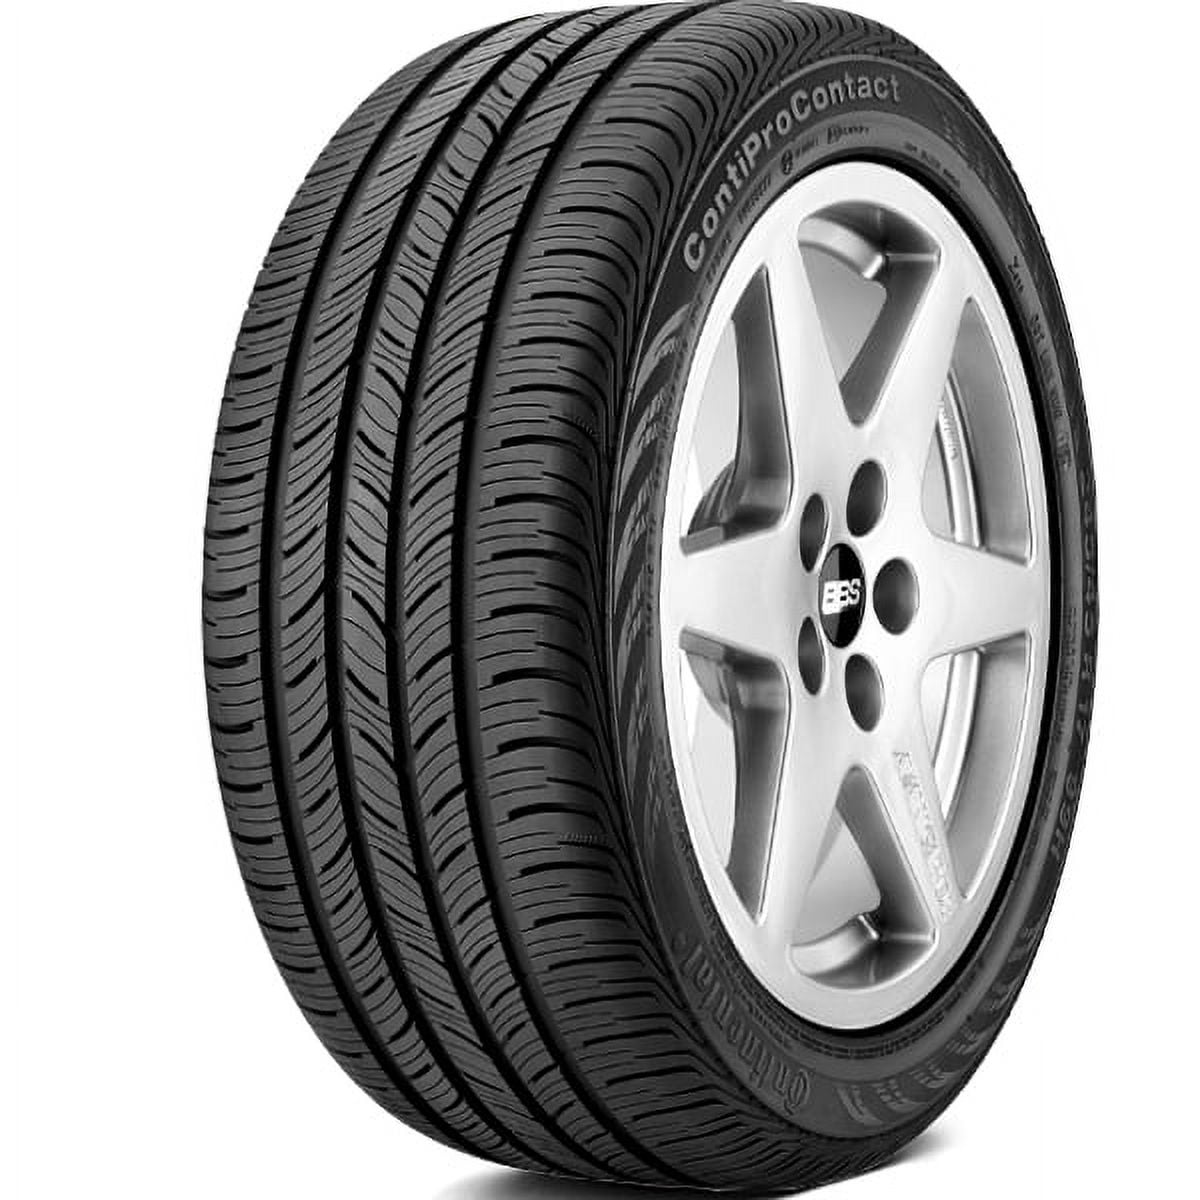 82H BSW Continental 185/55R15 ContiProContact Tire